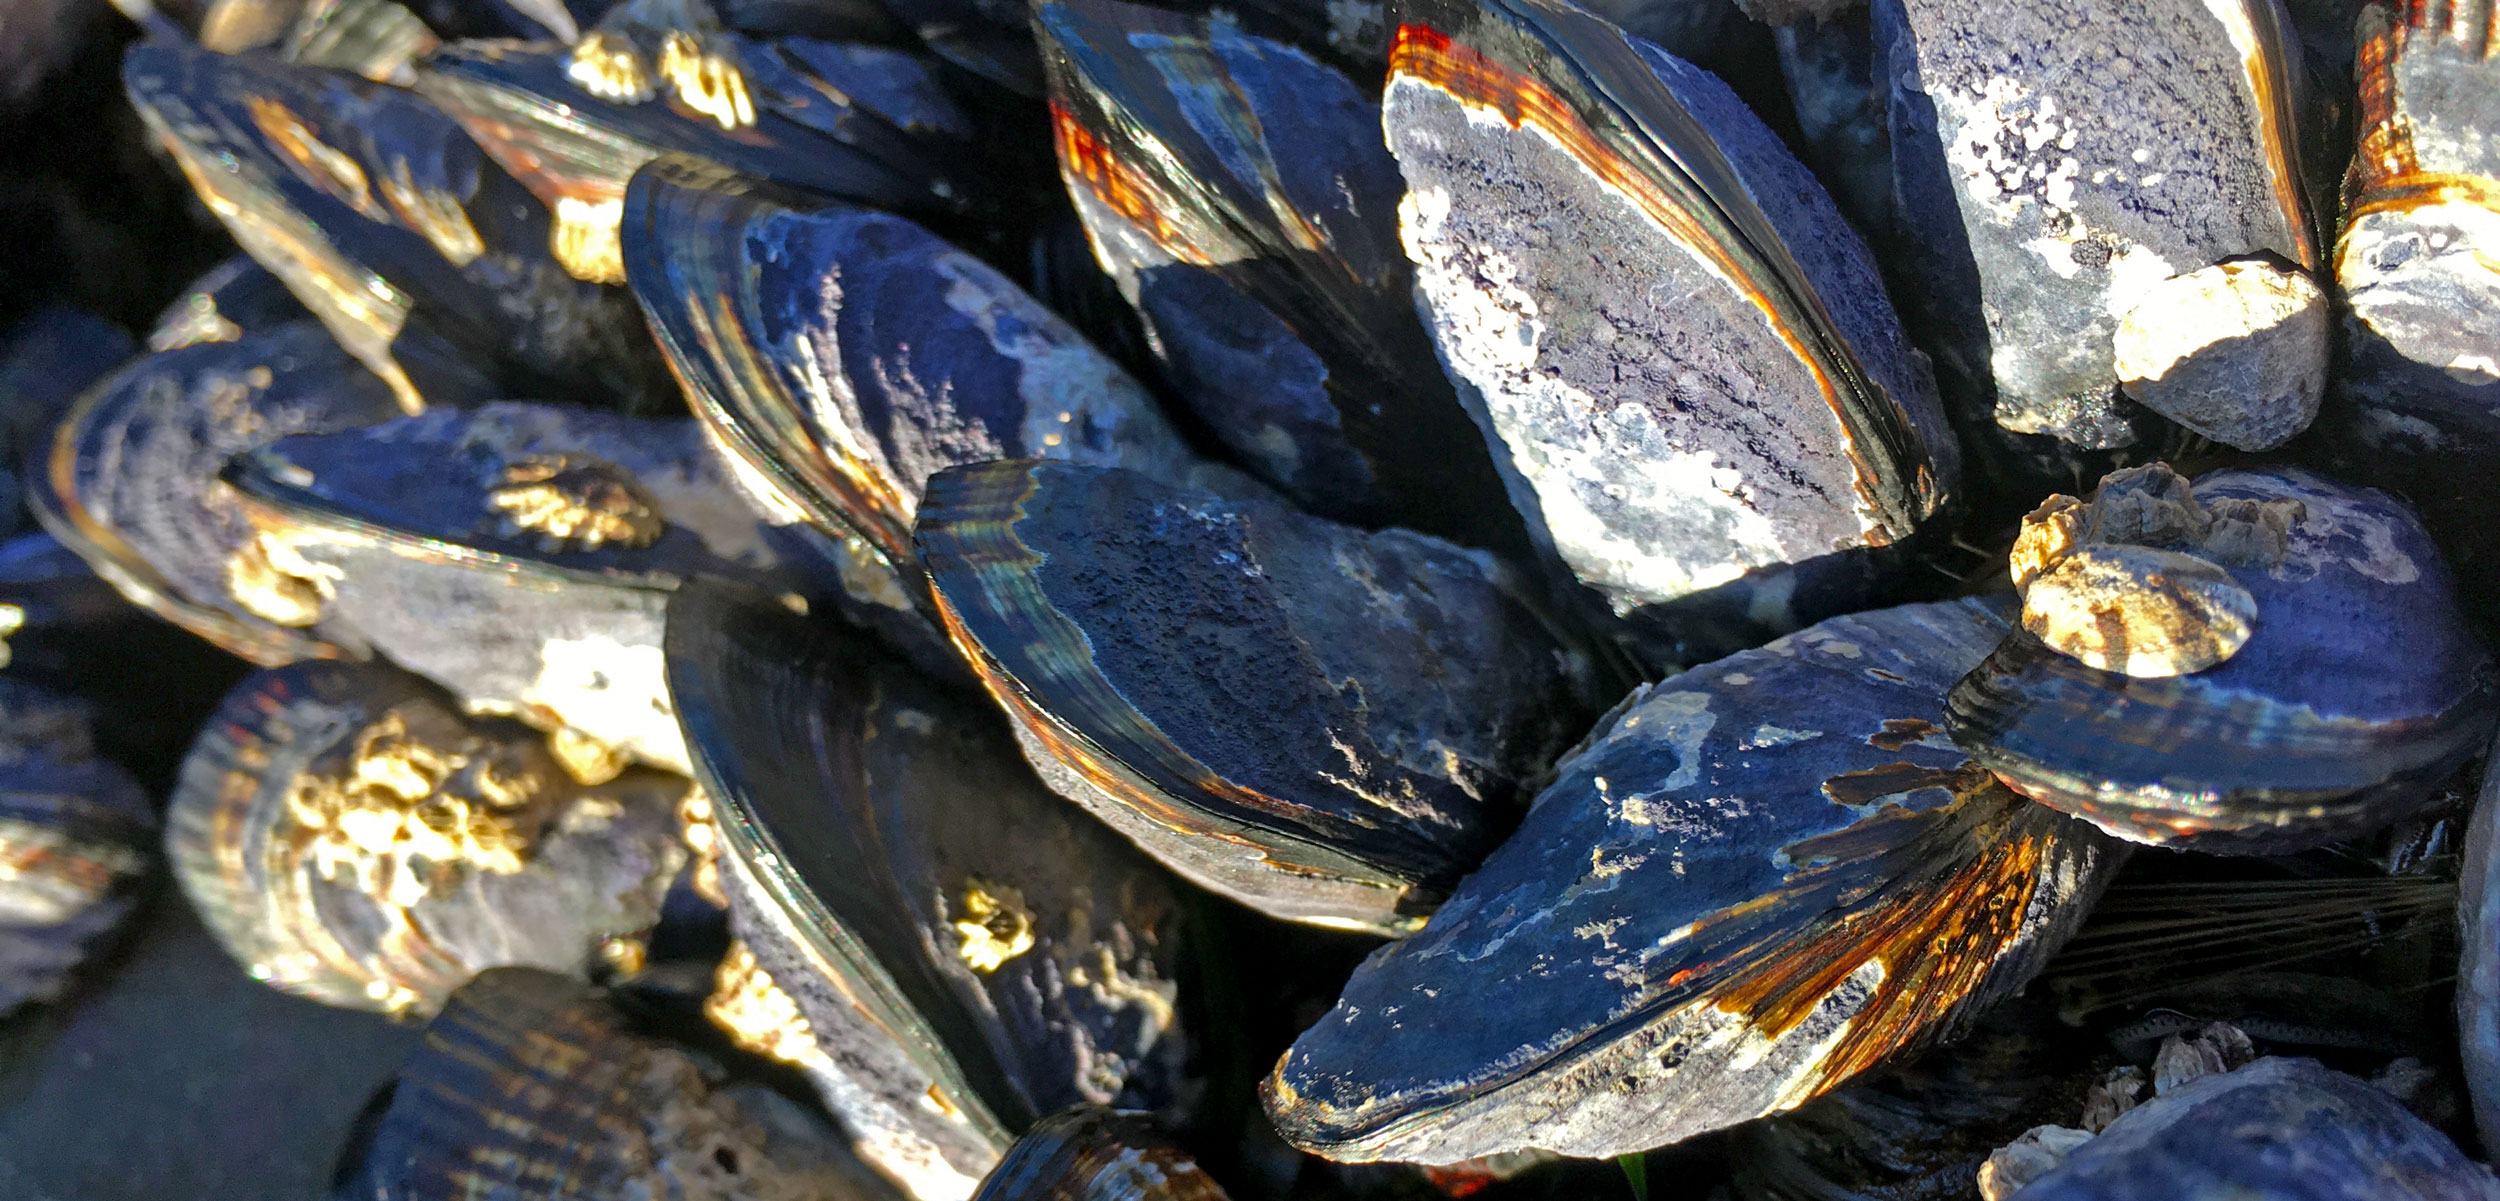 mussels affected by endolithic parasites